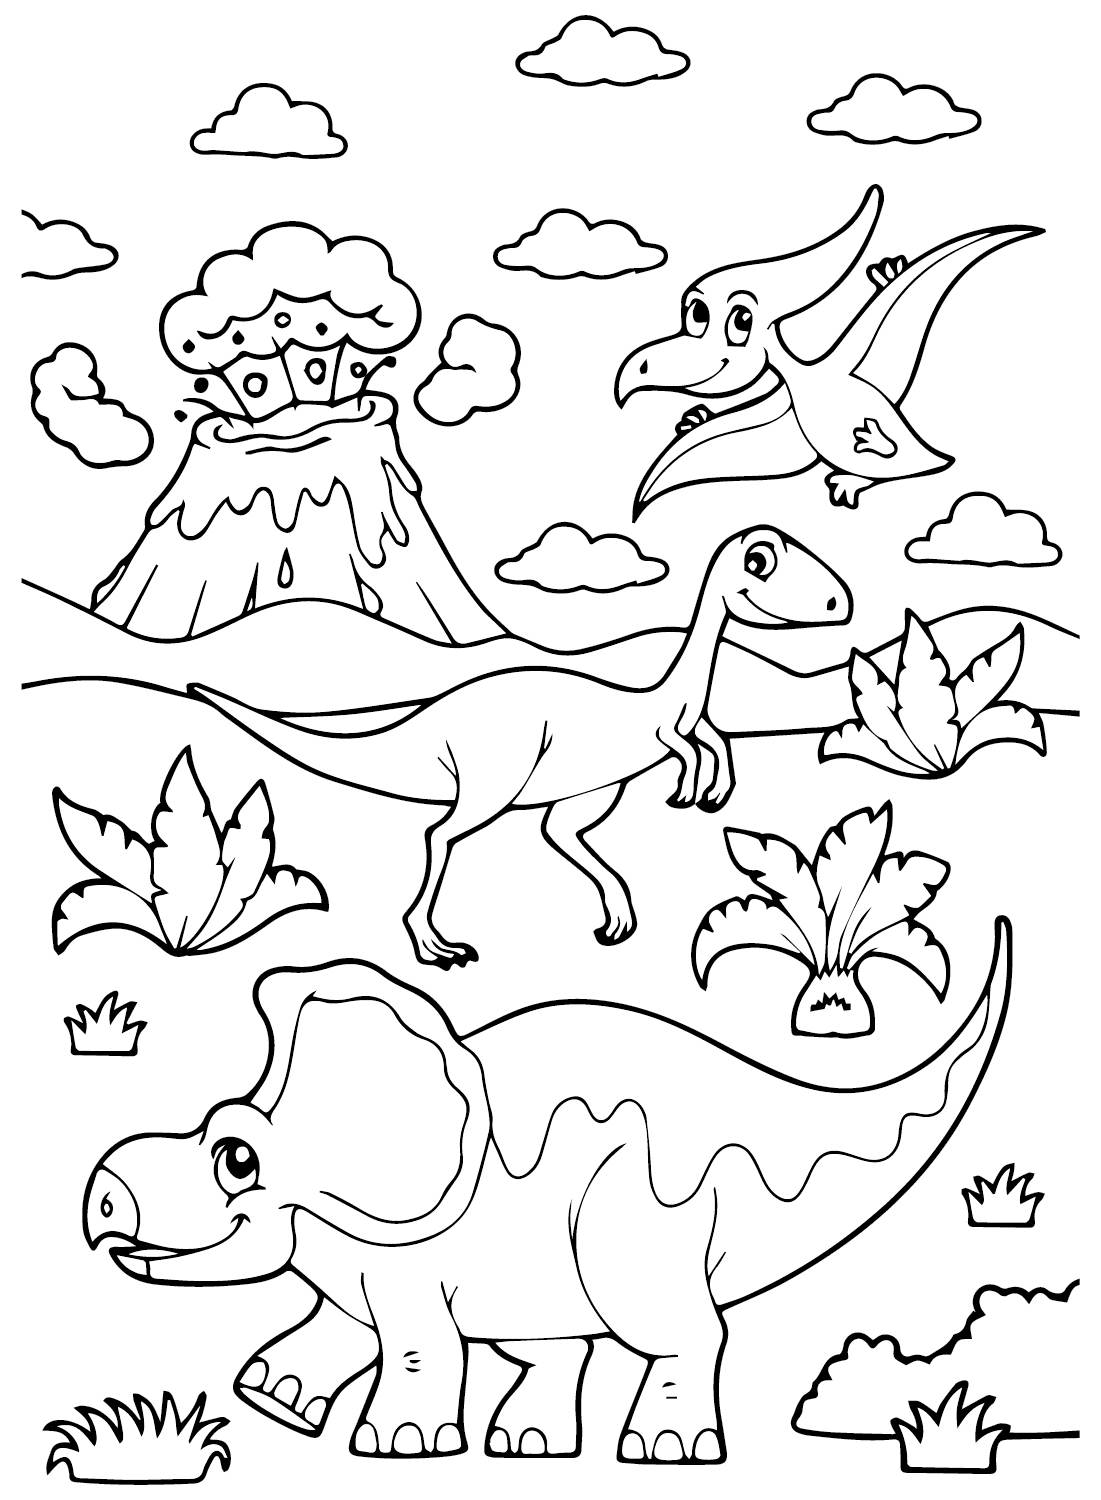 Print Protoceratops Coloring Page from Protoceratops